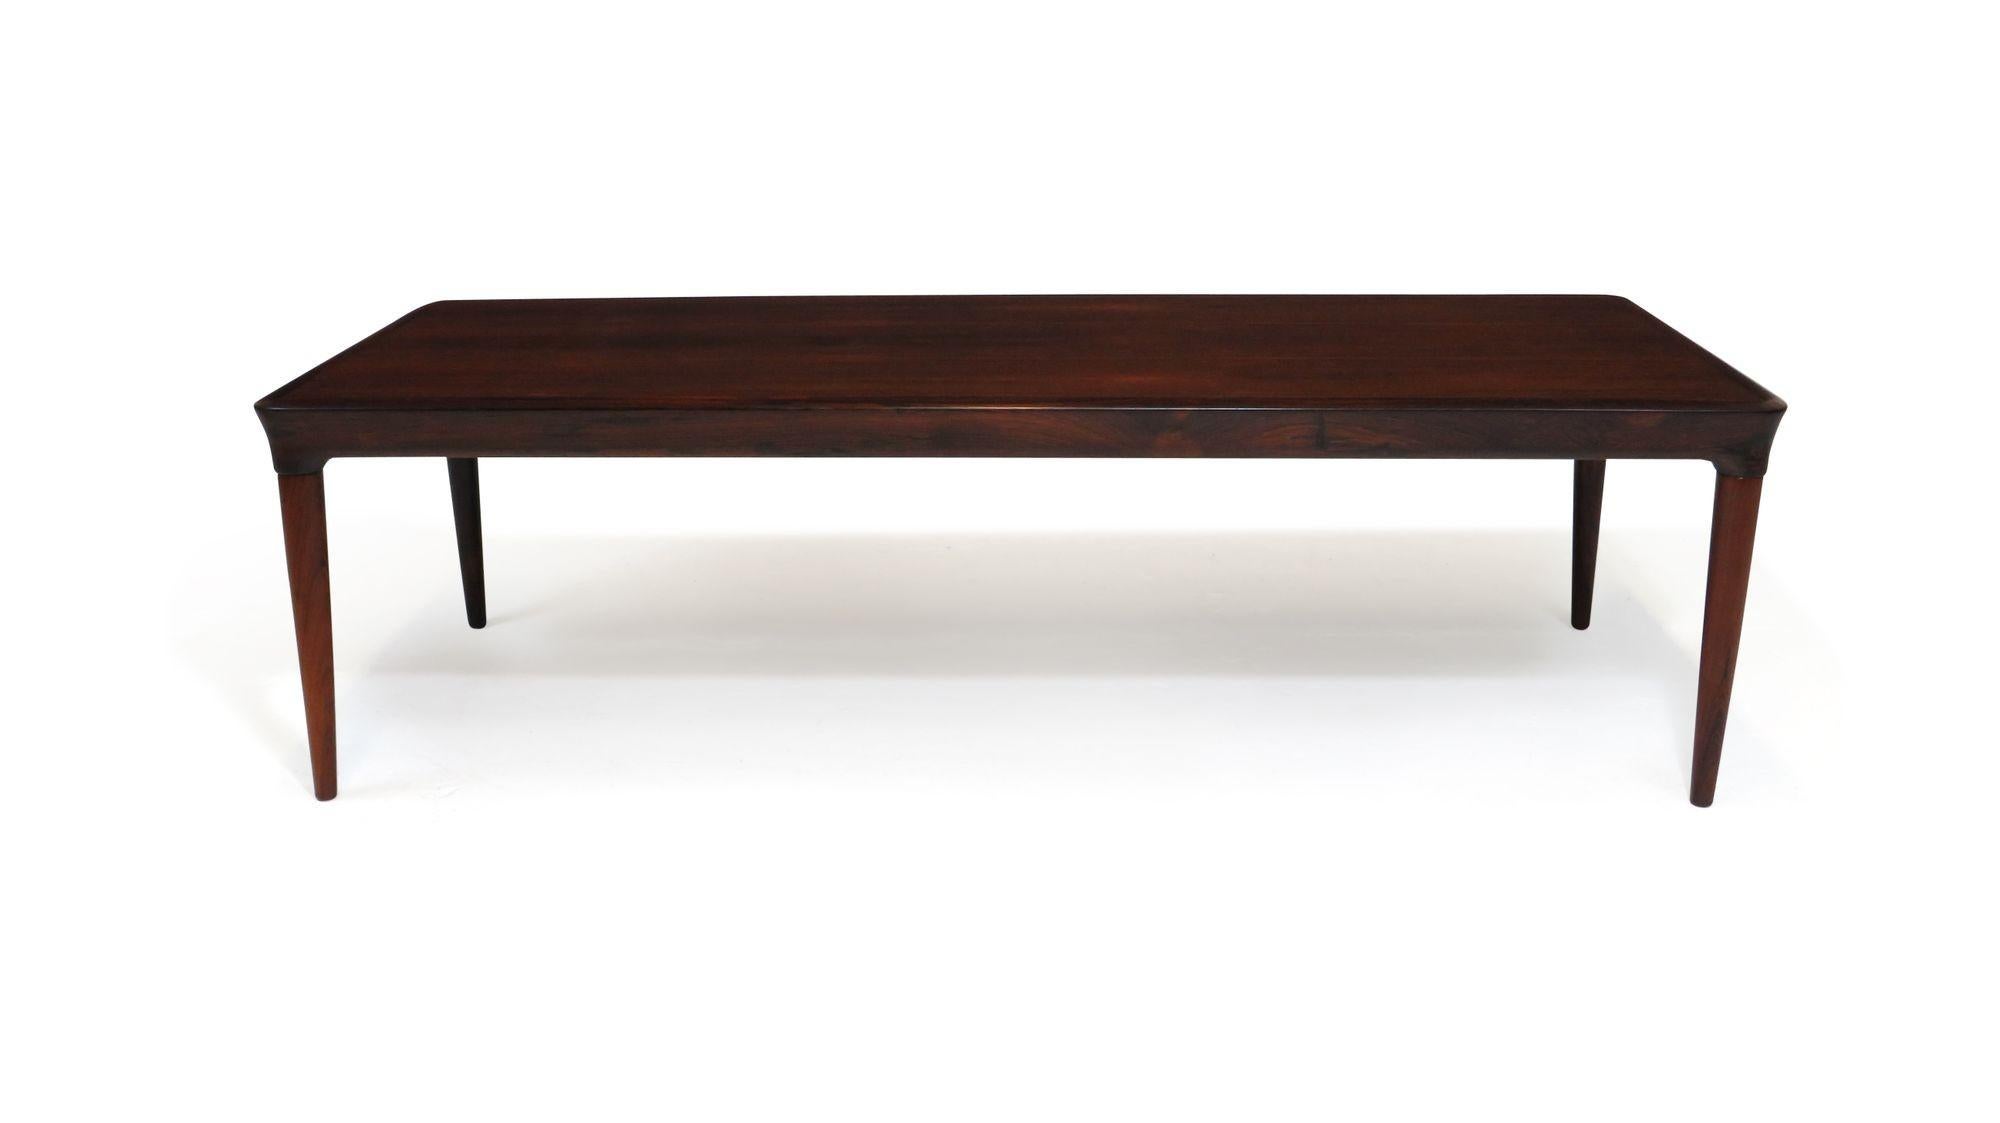 Mid century rosewood coffee table designed by H.W Klein, 1955, Denmark. The coffee table is crafted of Brazilian Rosewood with finely mitred edges and sculpted edges, raised on tapered legs.